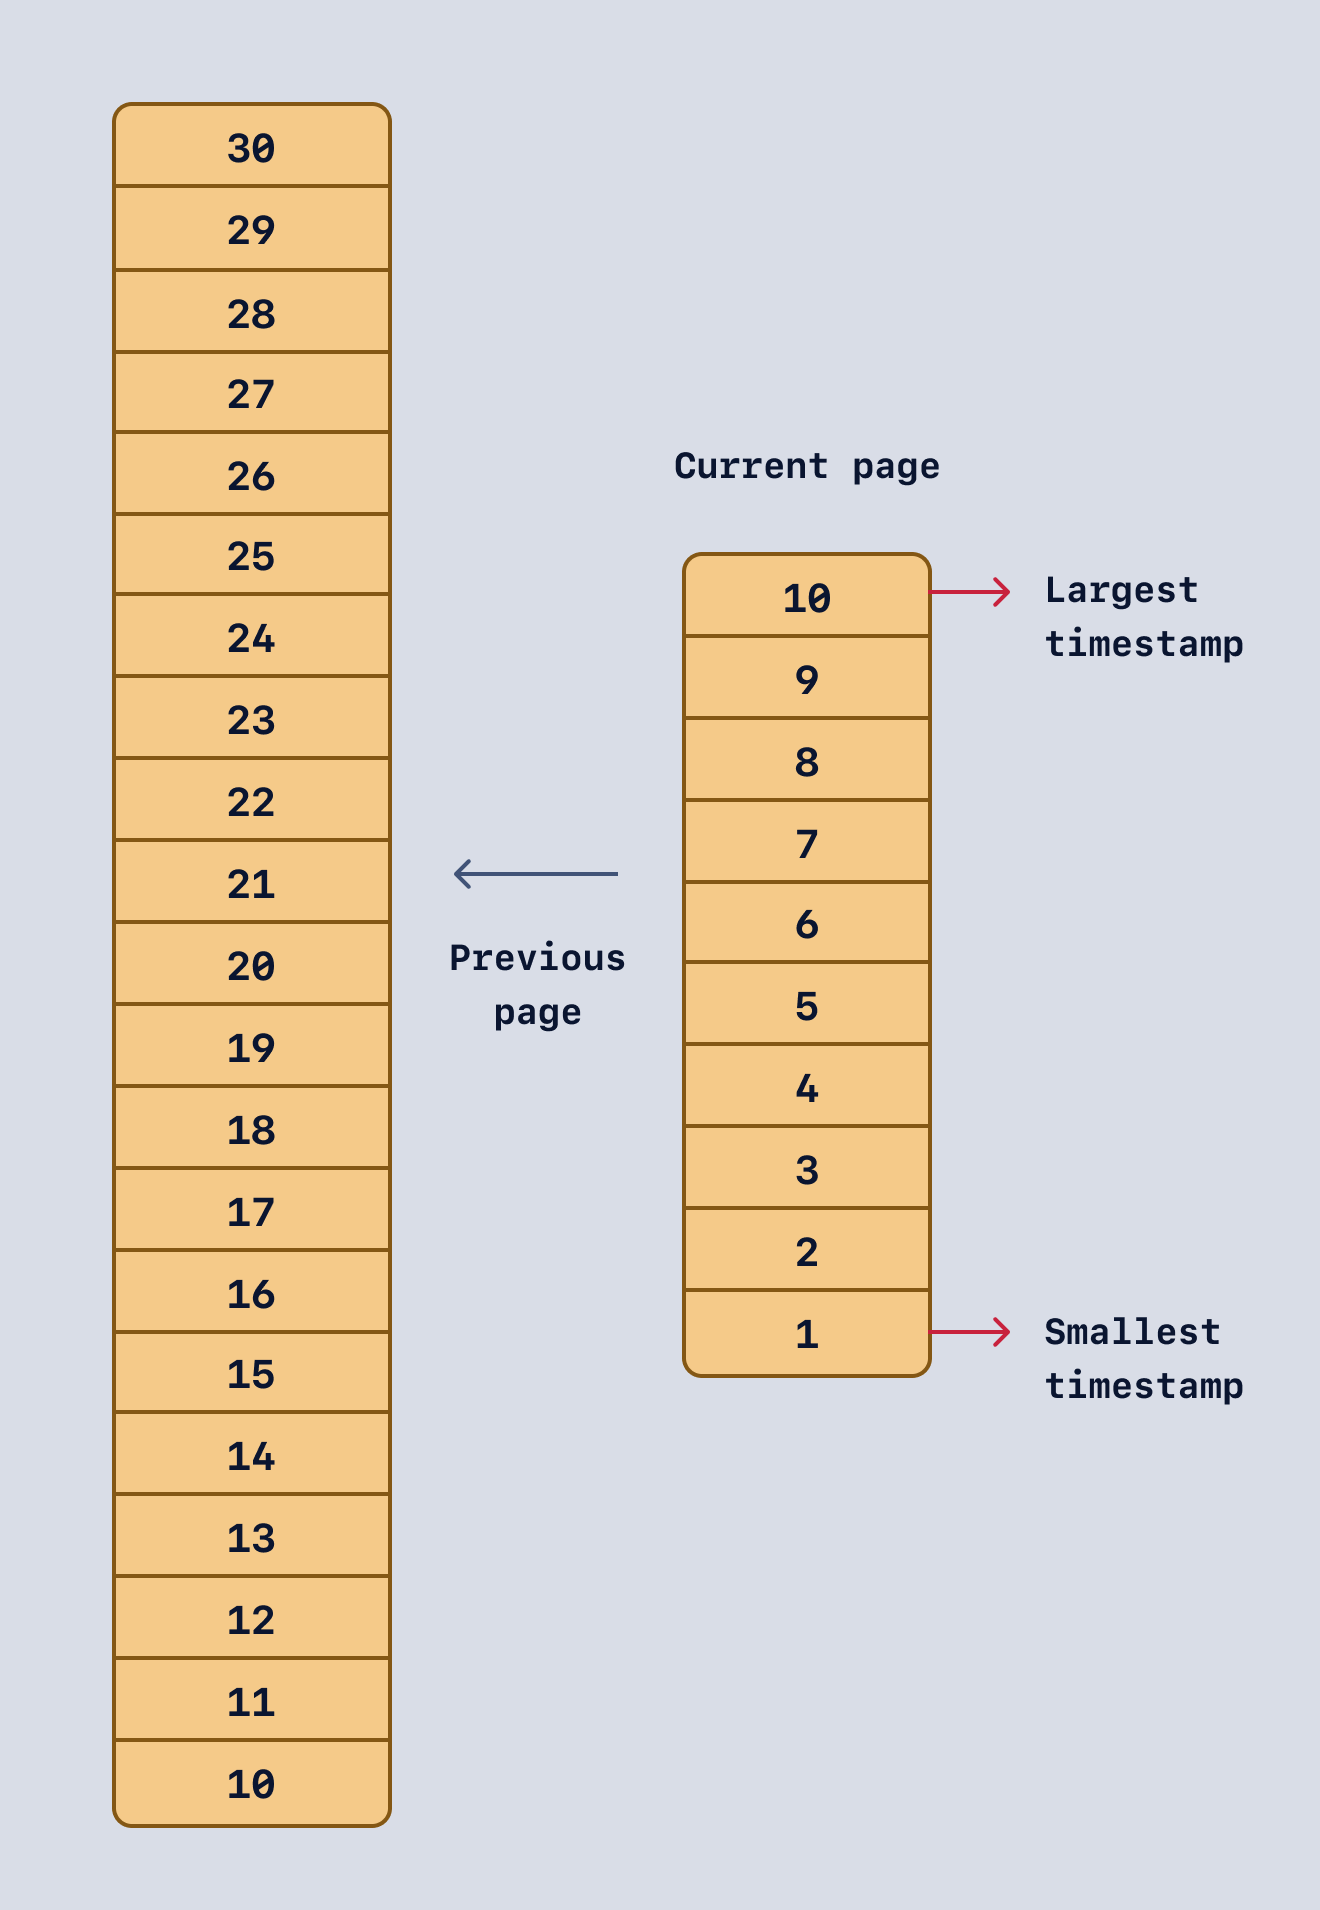 Showing the pool of rows to pick when going to the previous page using cursor based pagination